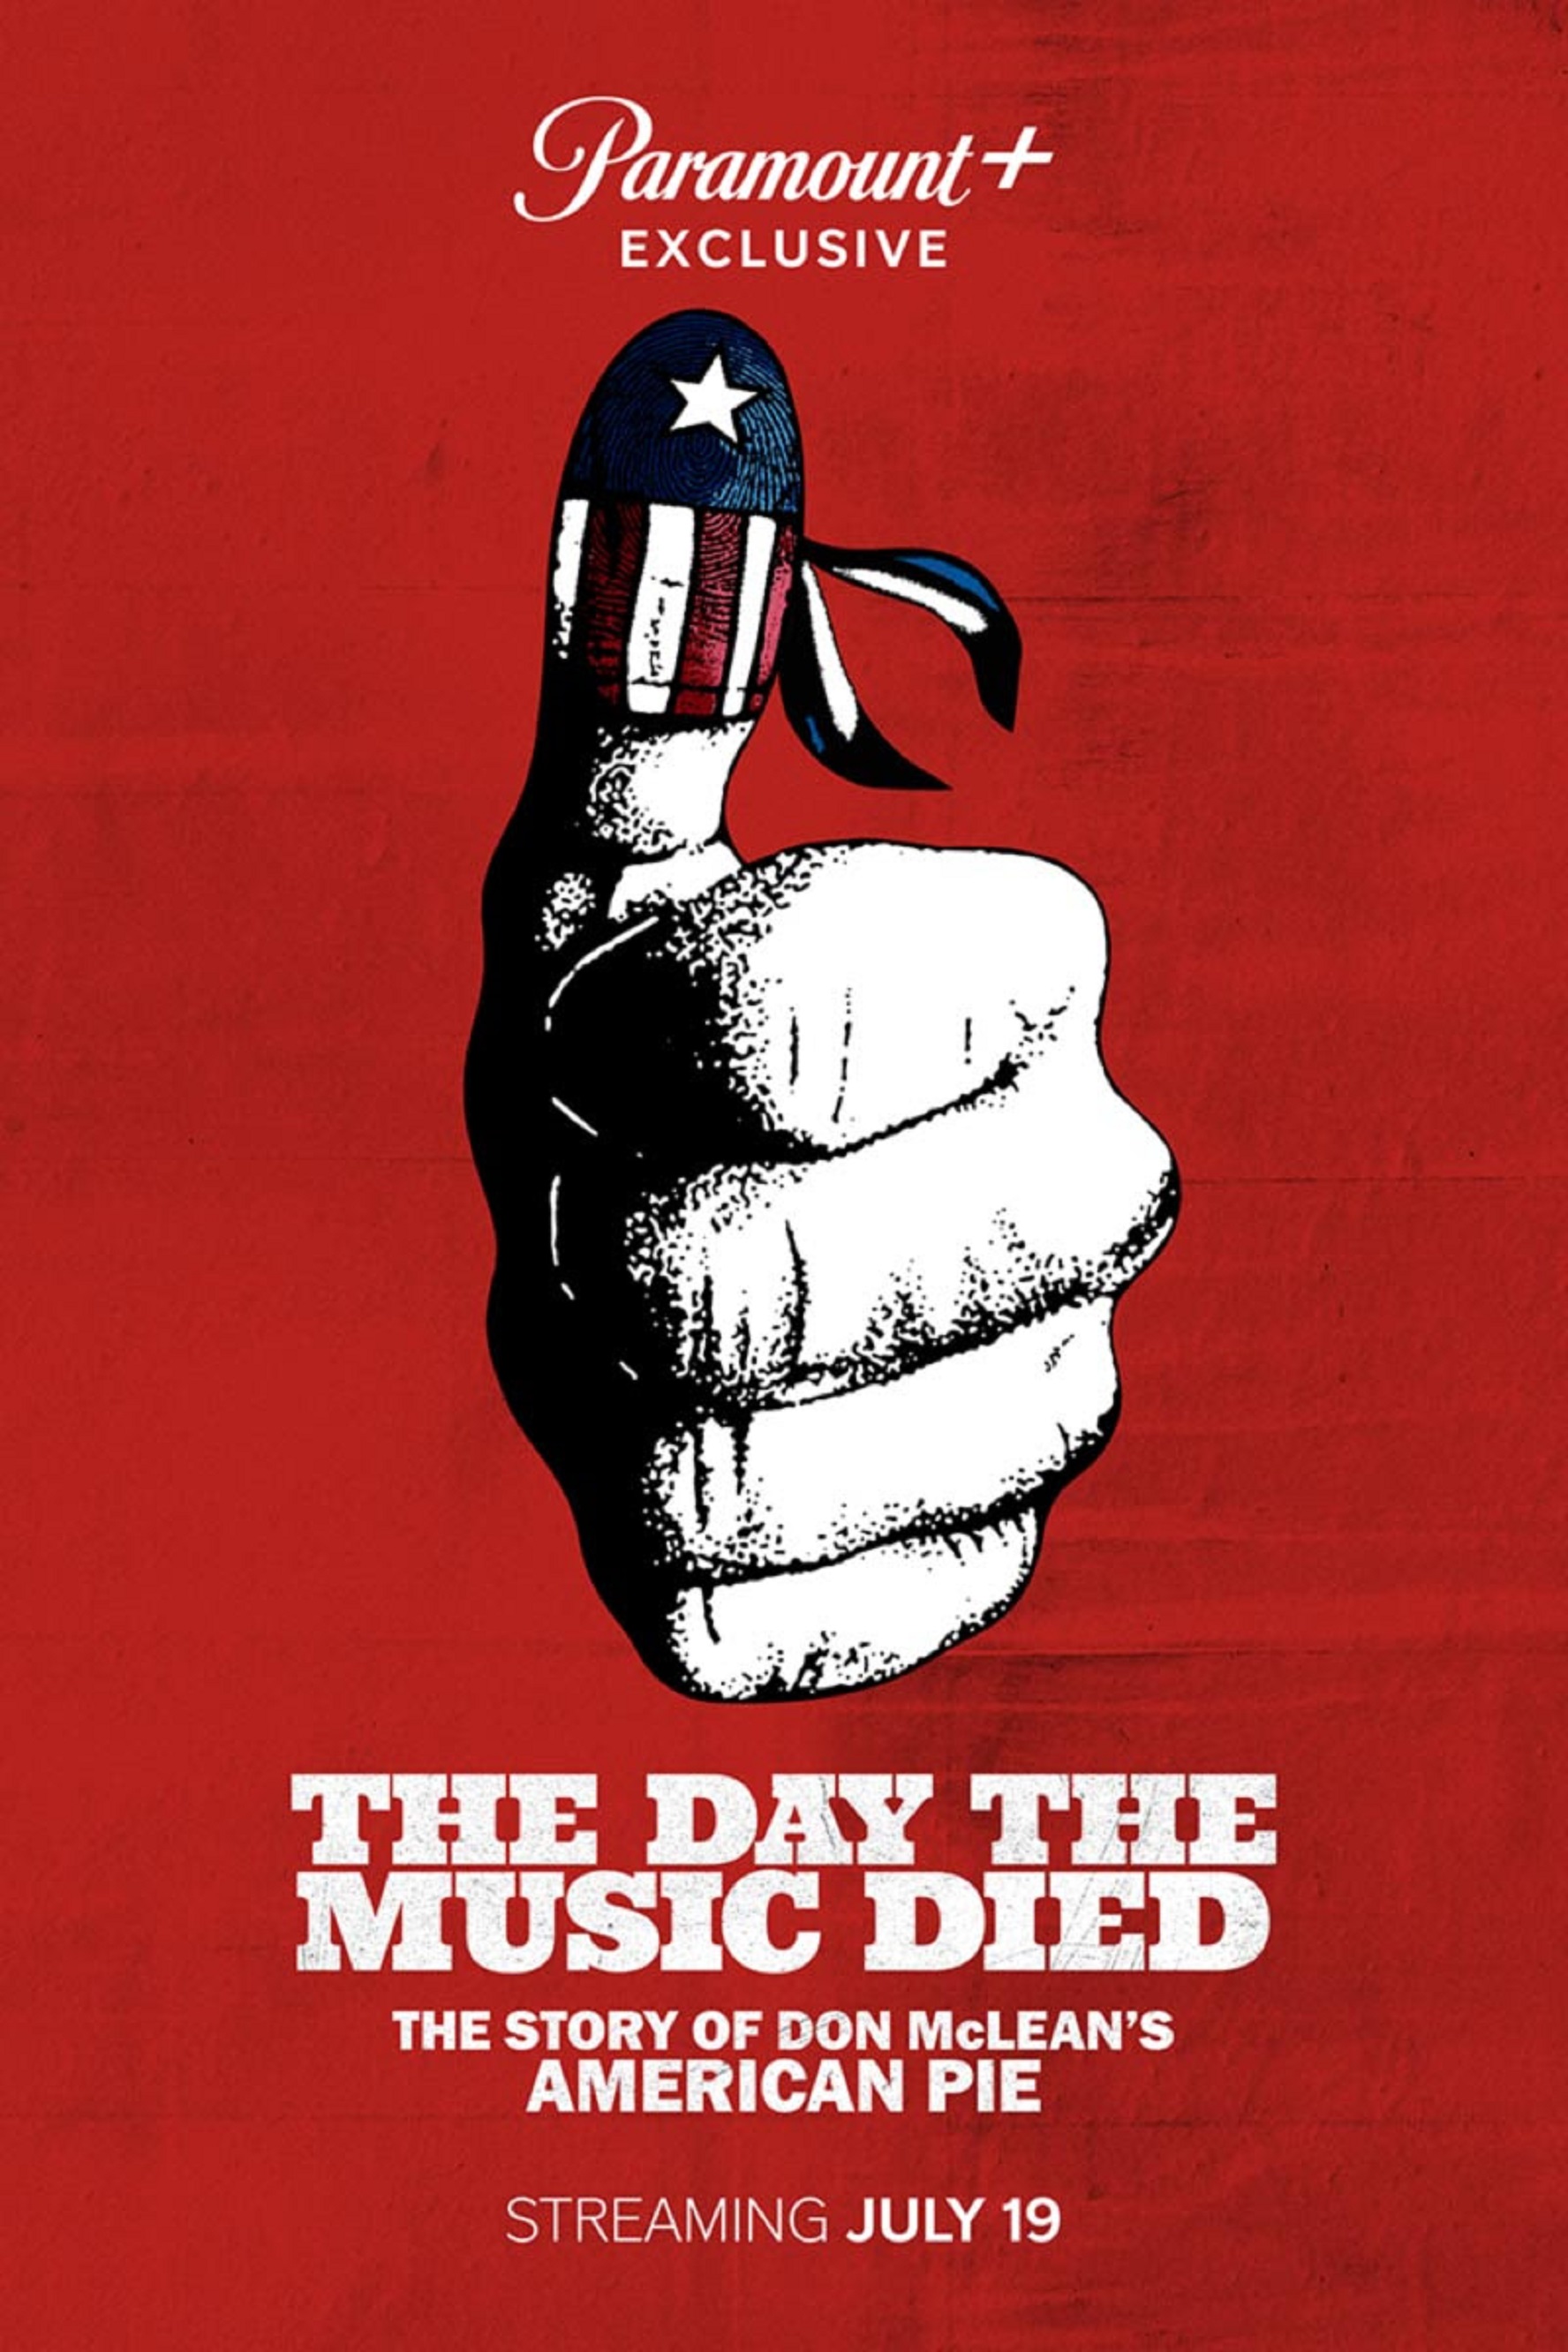 "THE DAY THE MUSIC DIED: THE STORY OF DON McLEAN'S 'AMERICAN PIE'" TO PREMIERE EXCLUSIVELY ON PARAMOUNT+ JULY 19